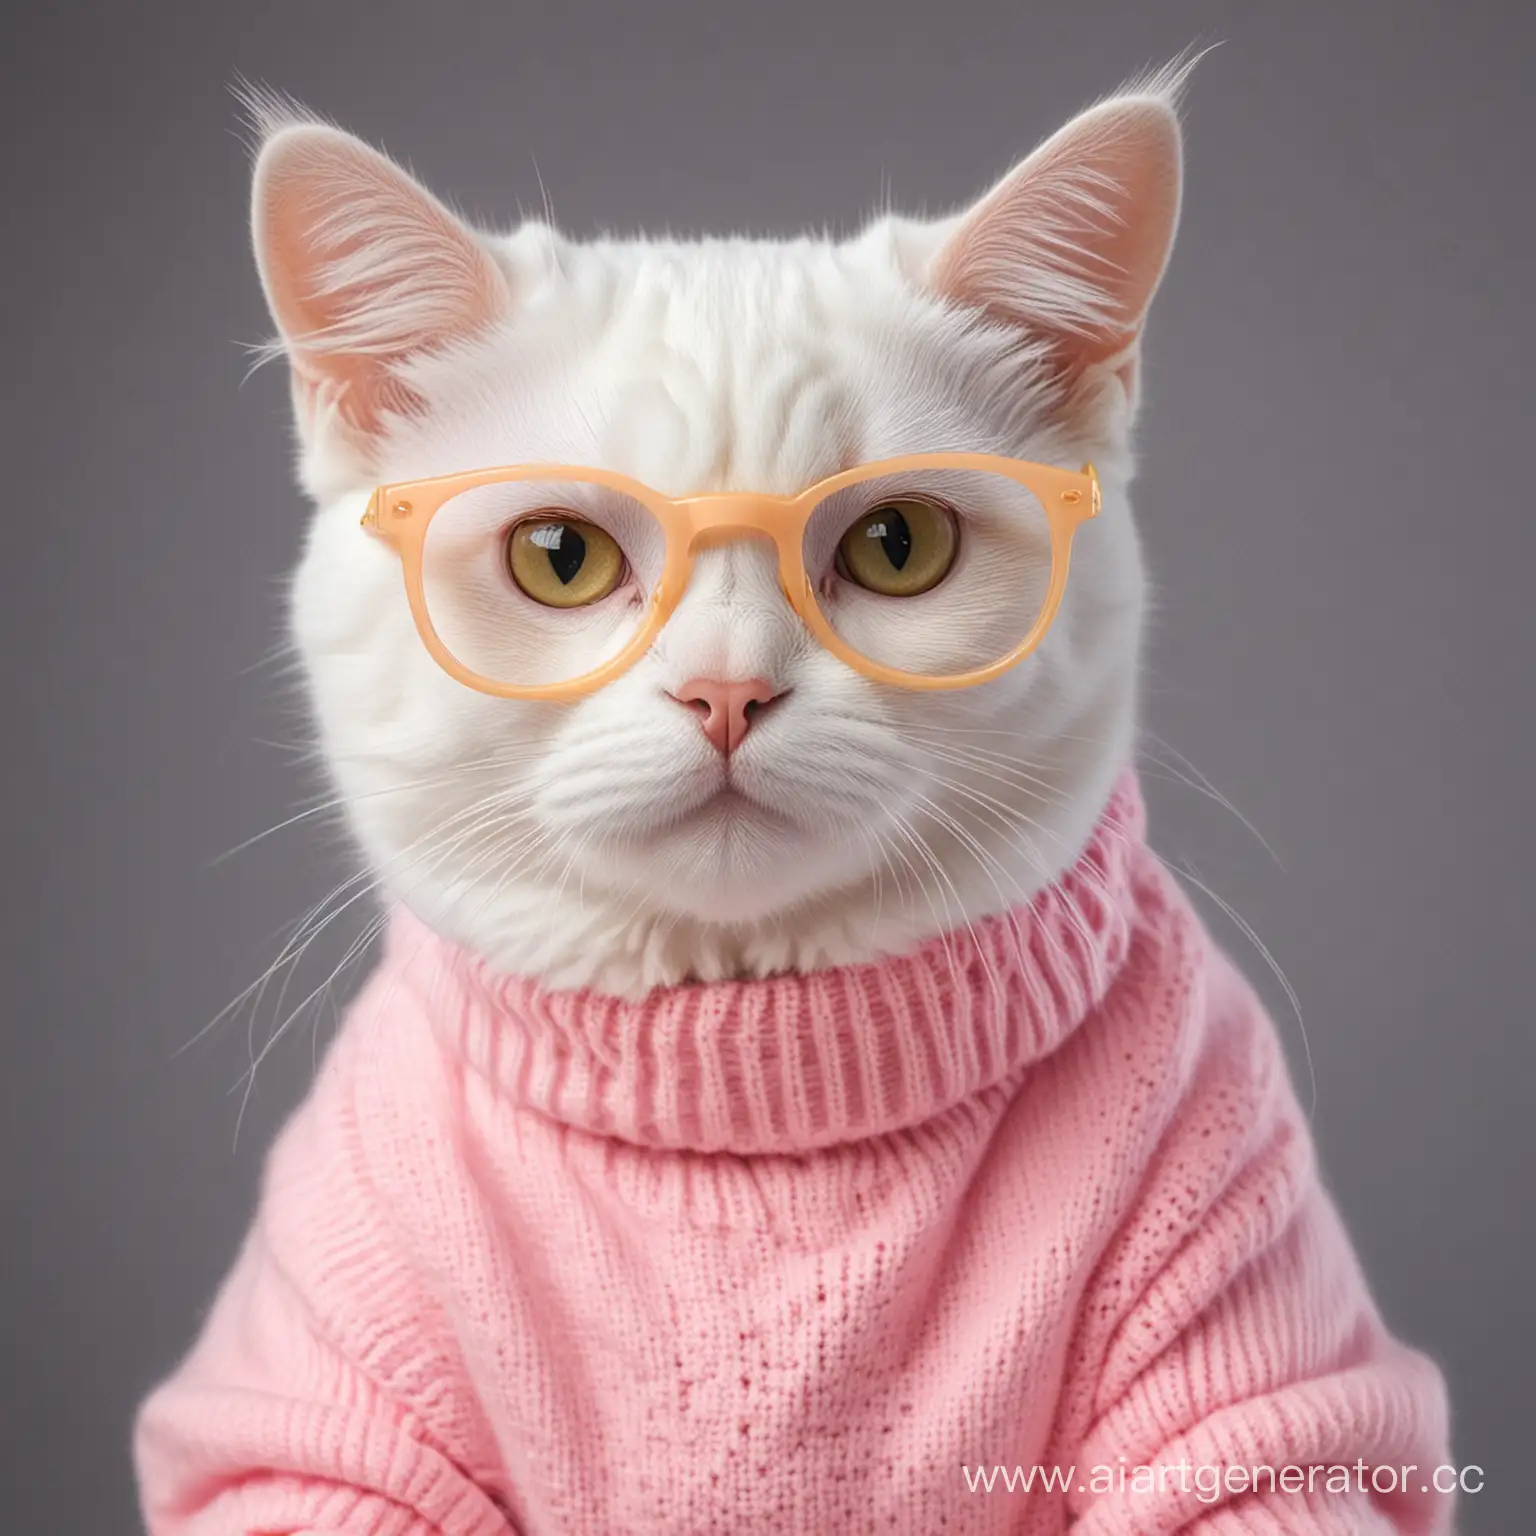 Fluffy-White-Cat-in-Stylish-Yellow-Glasses-and-Chic-Pink-Sweater